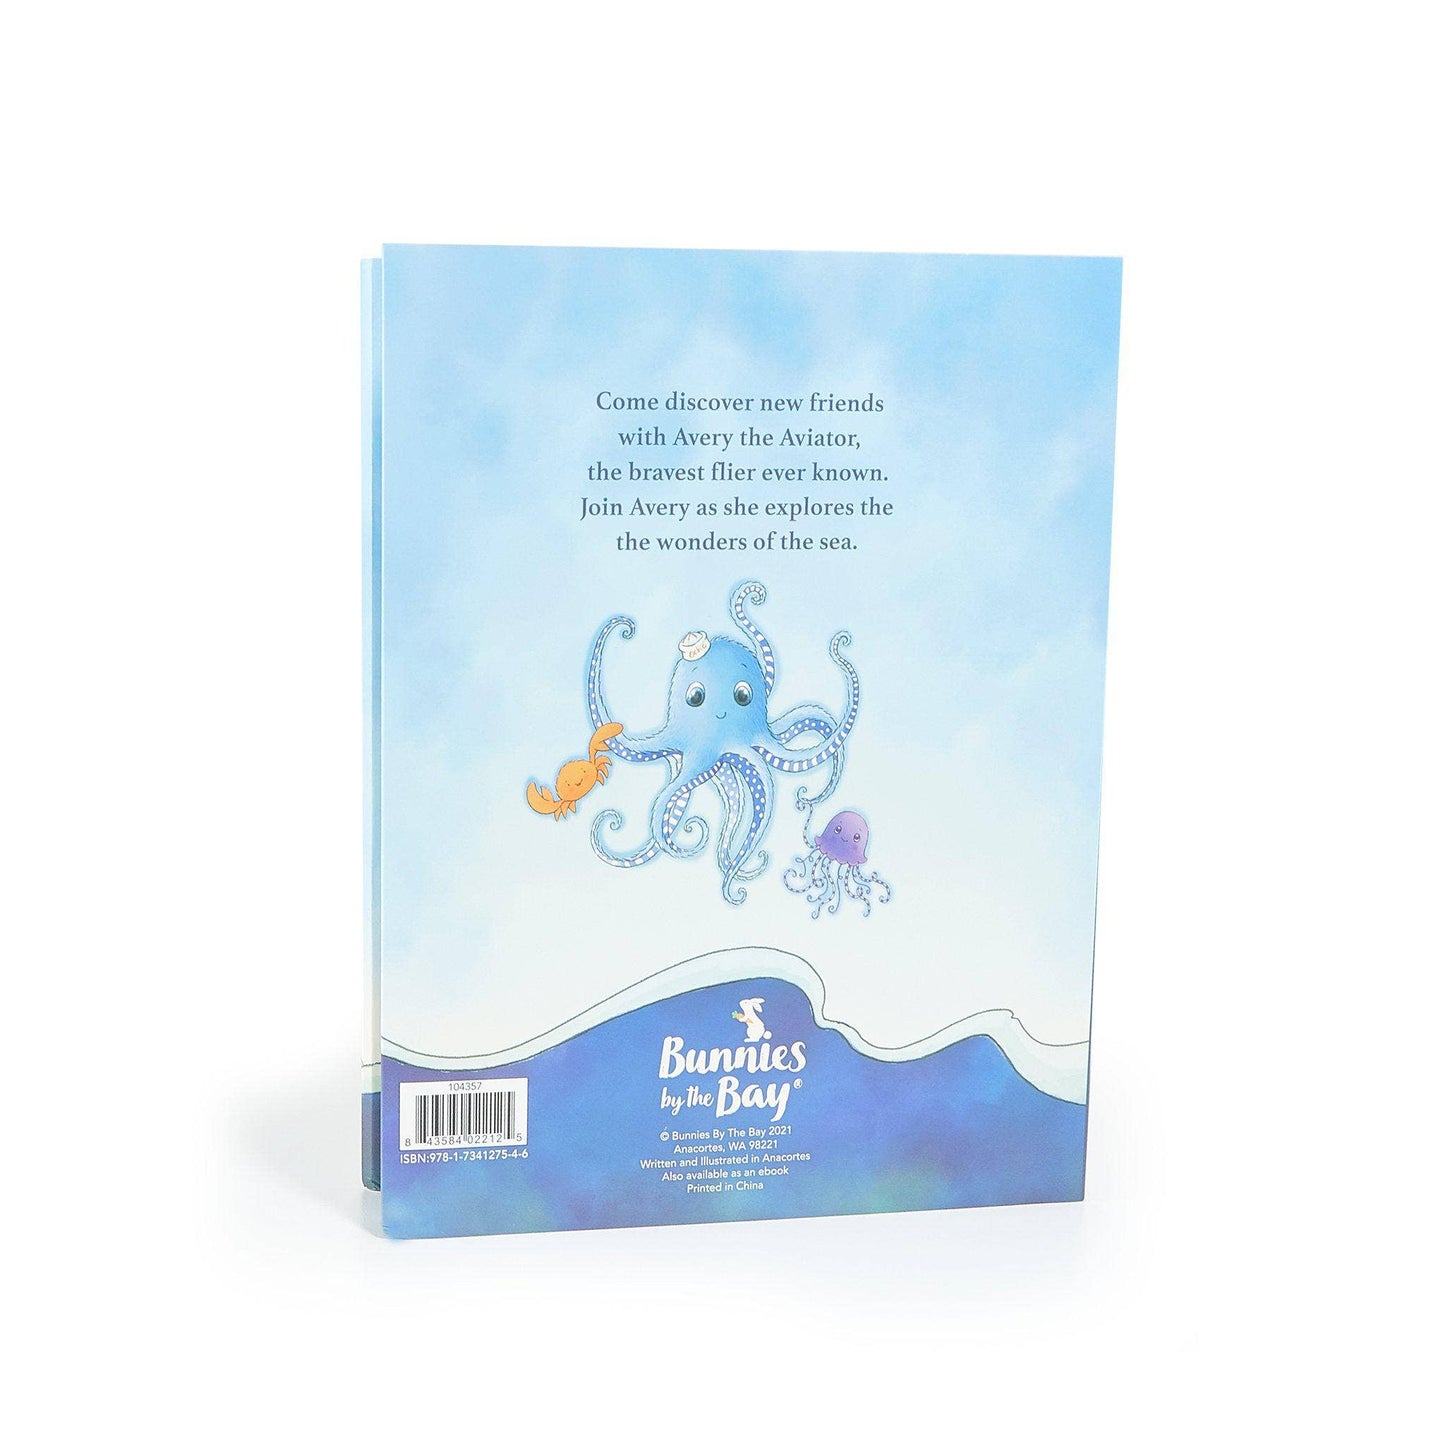 Avery the Aviator Explores the Sea A To Z Story Book